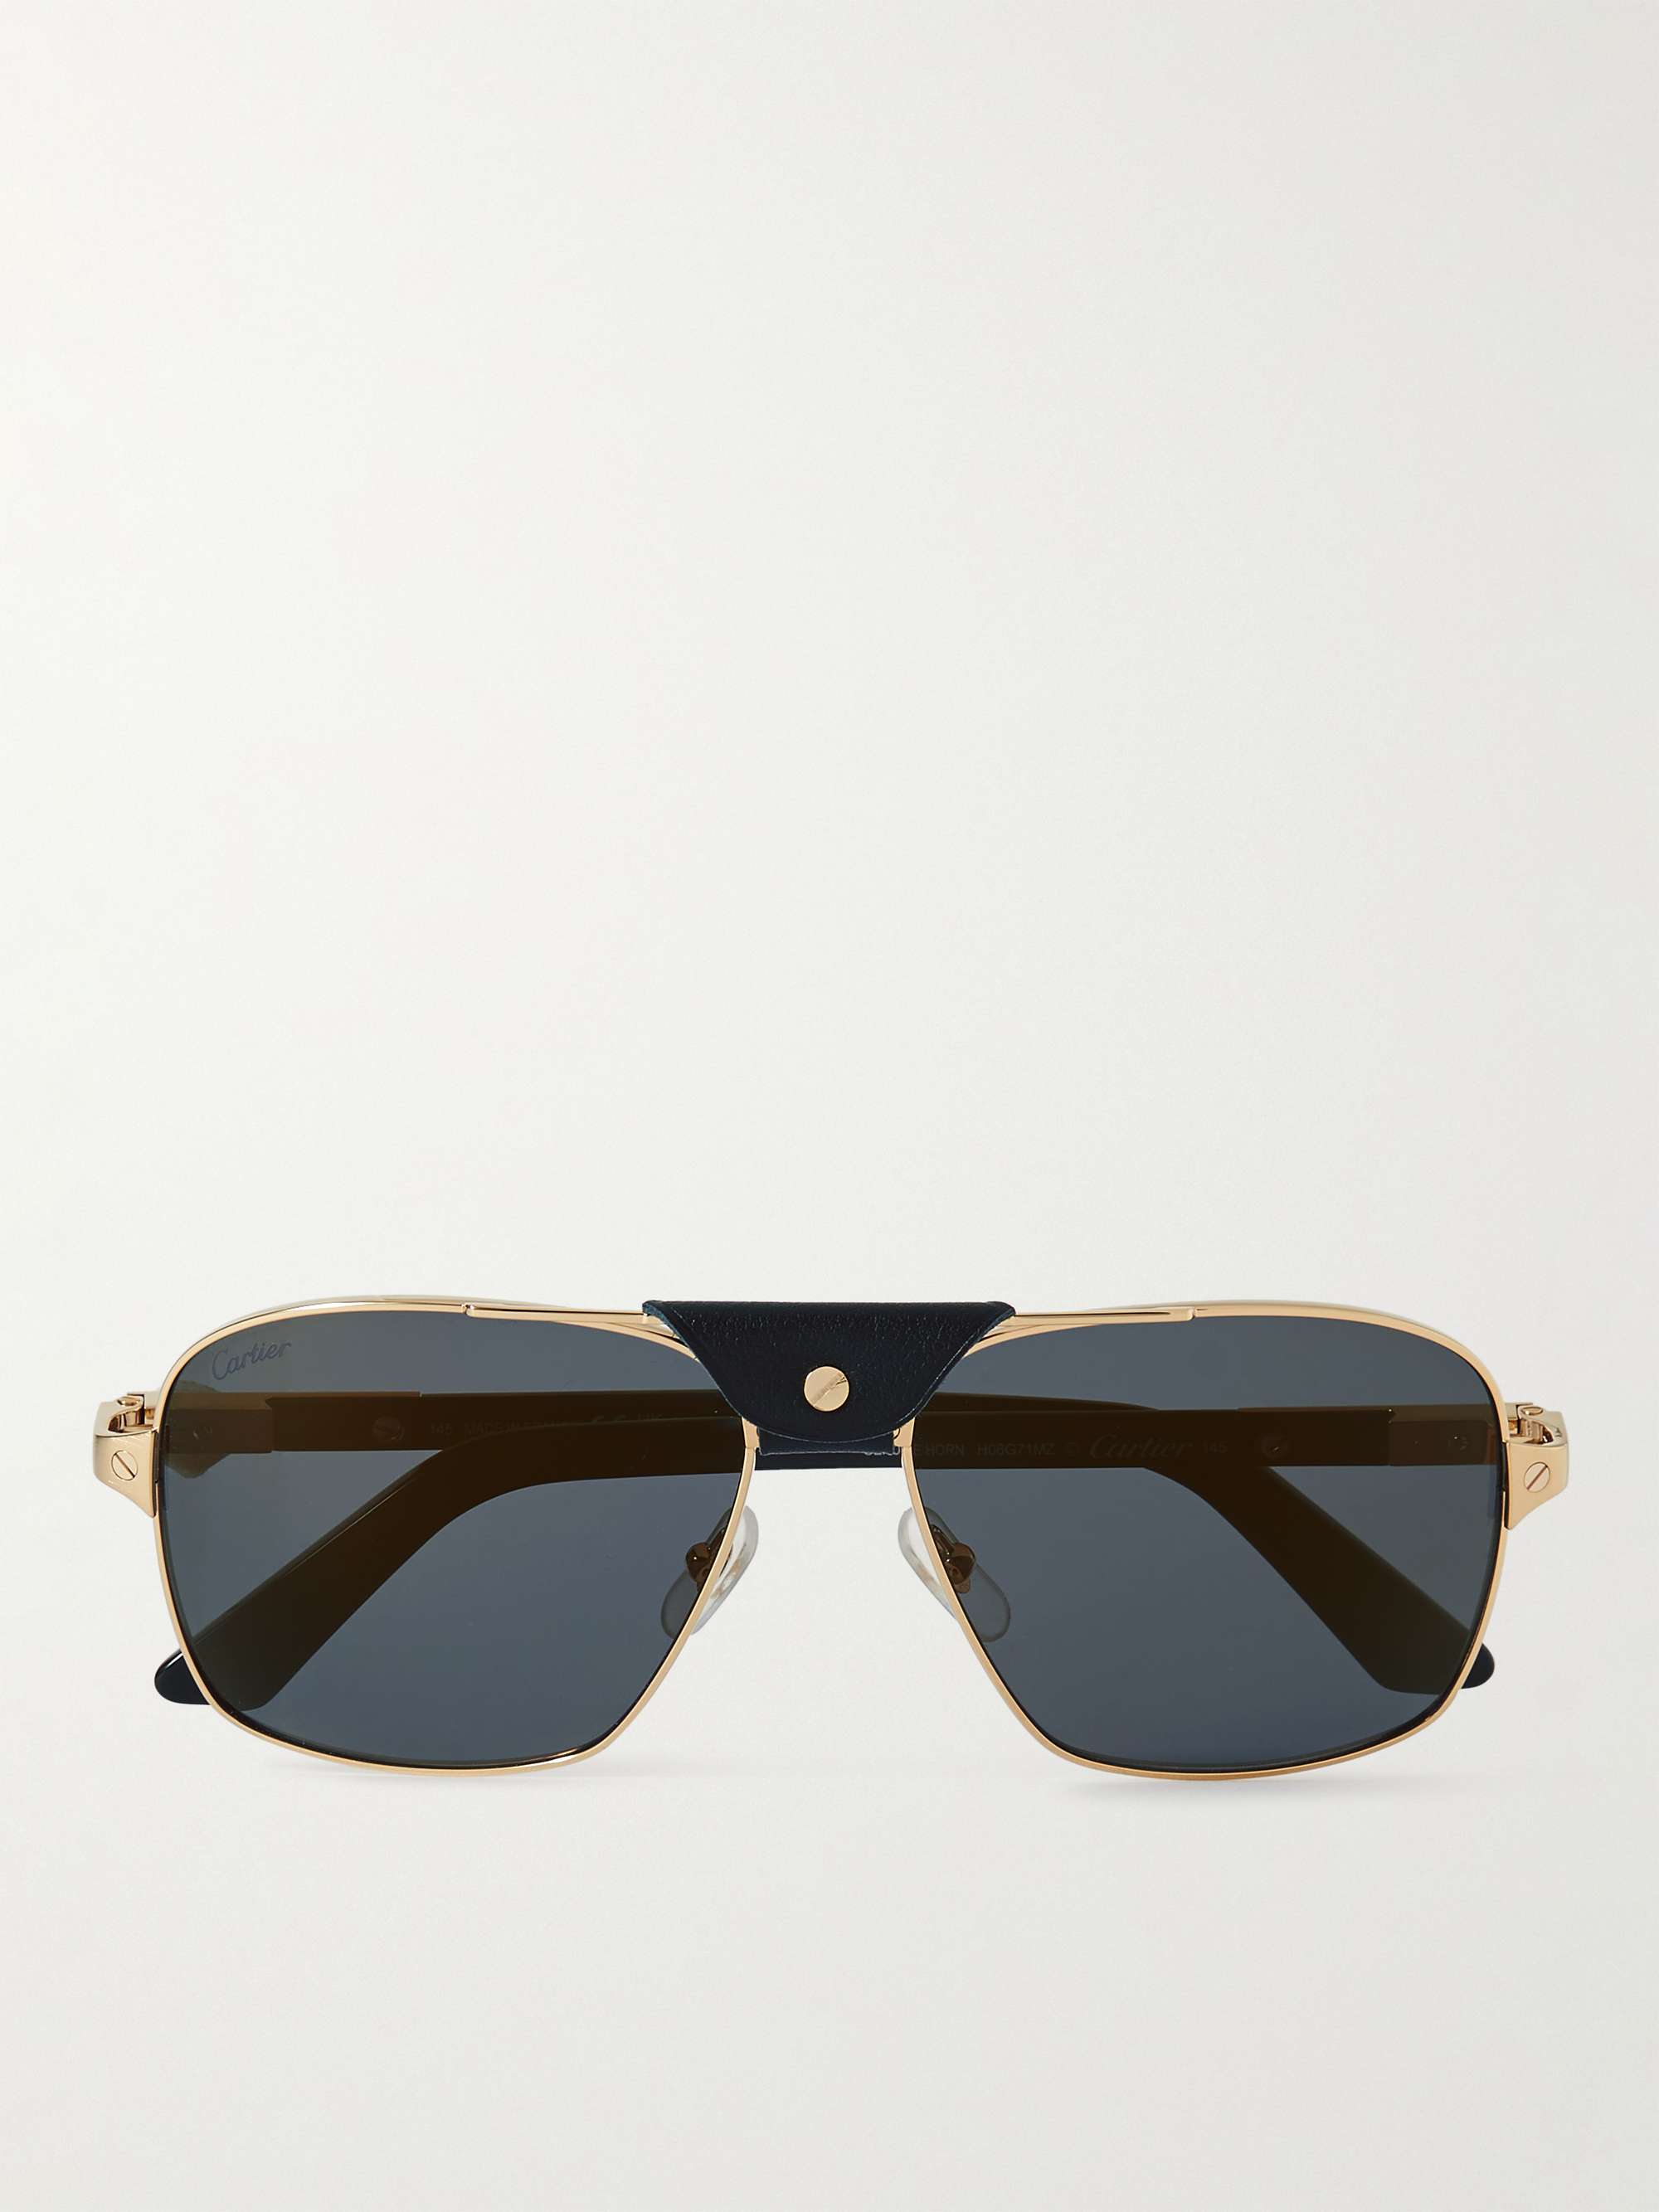 CARTIER Aviator-Style Leather-Trimmed and Acetate | MR PORTER